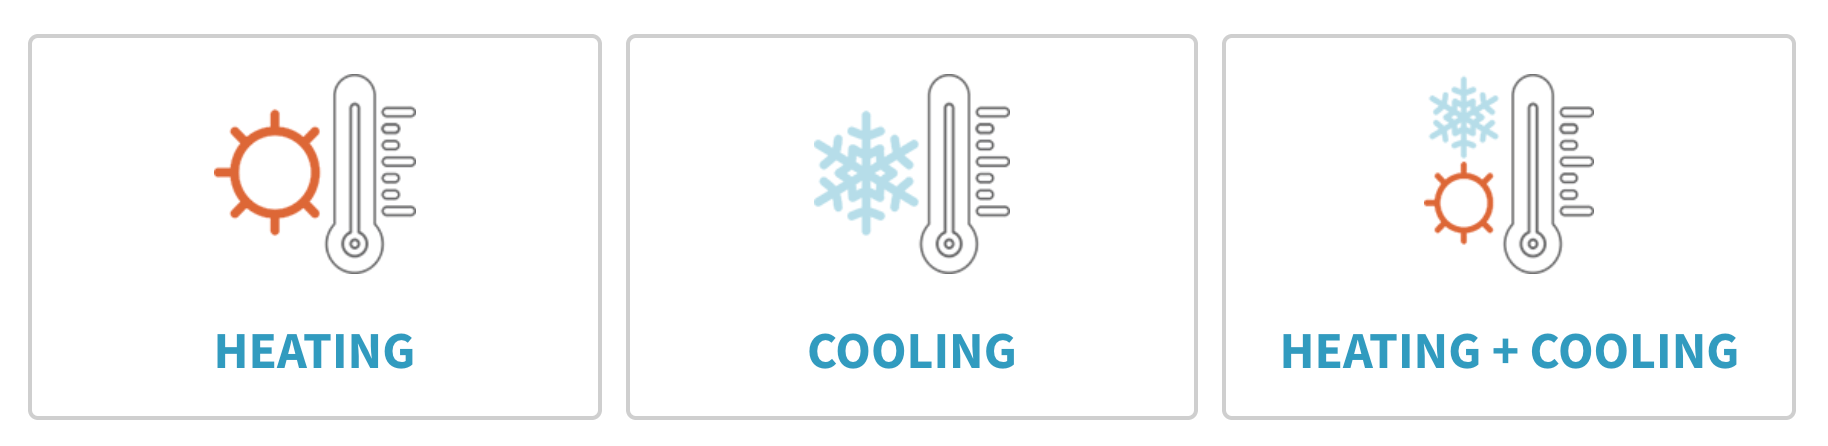 heating, cooling, or heating and cooling options